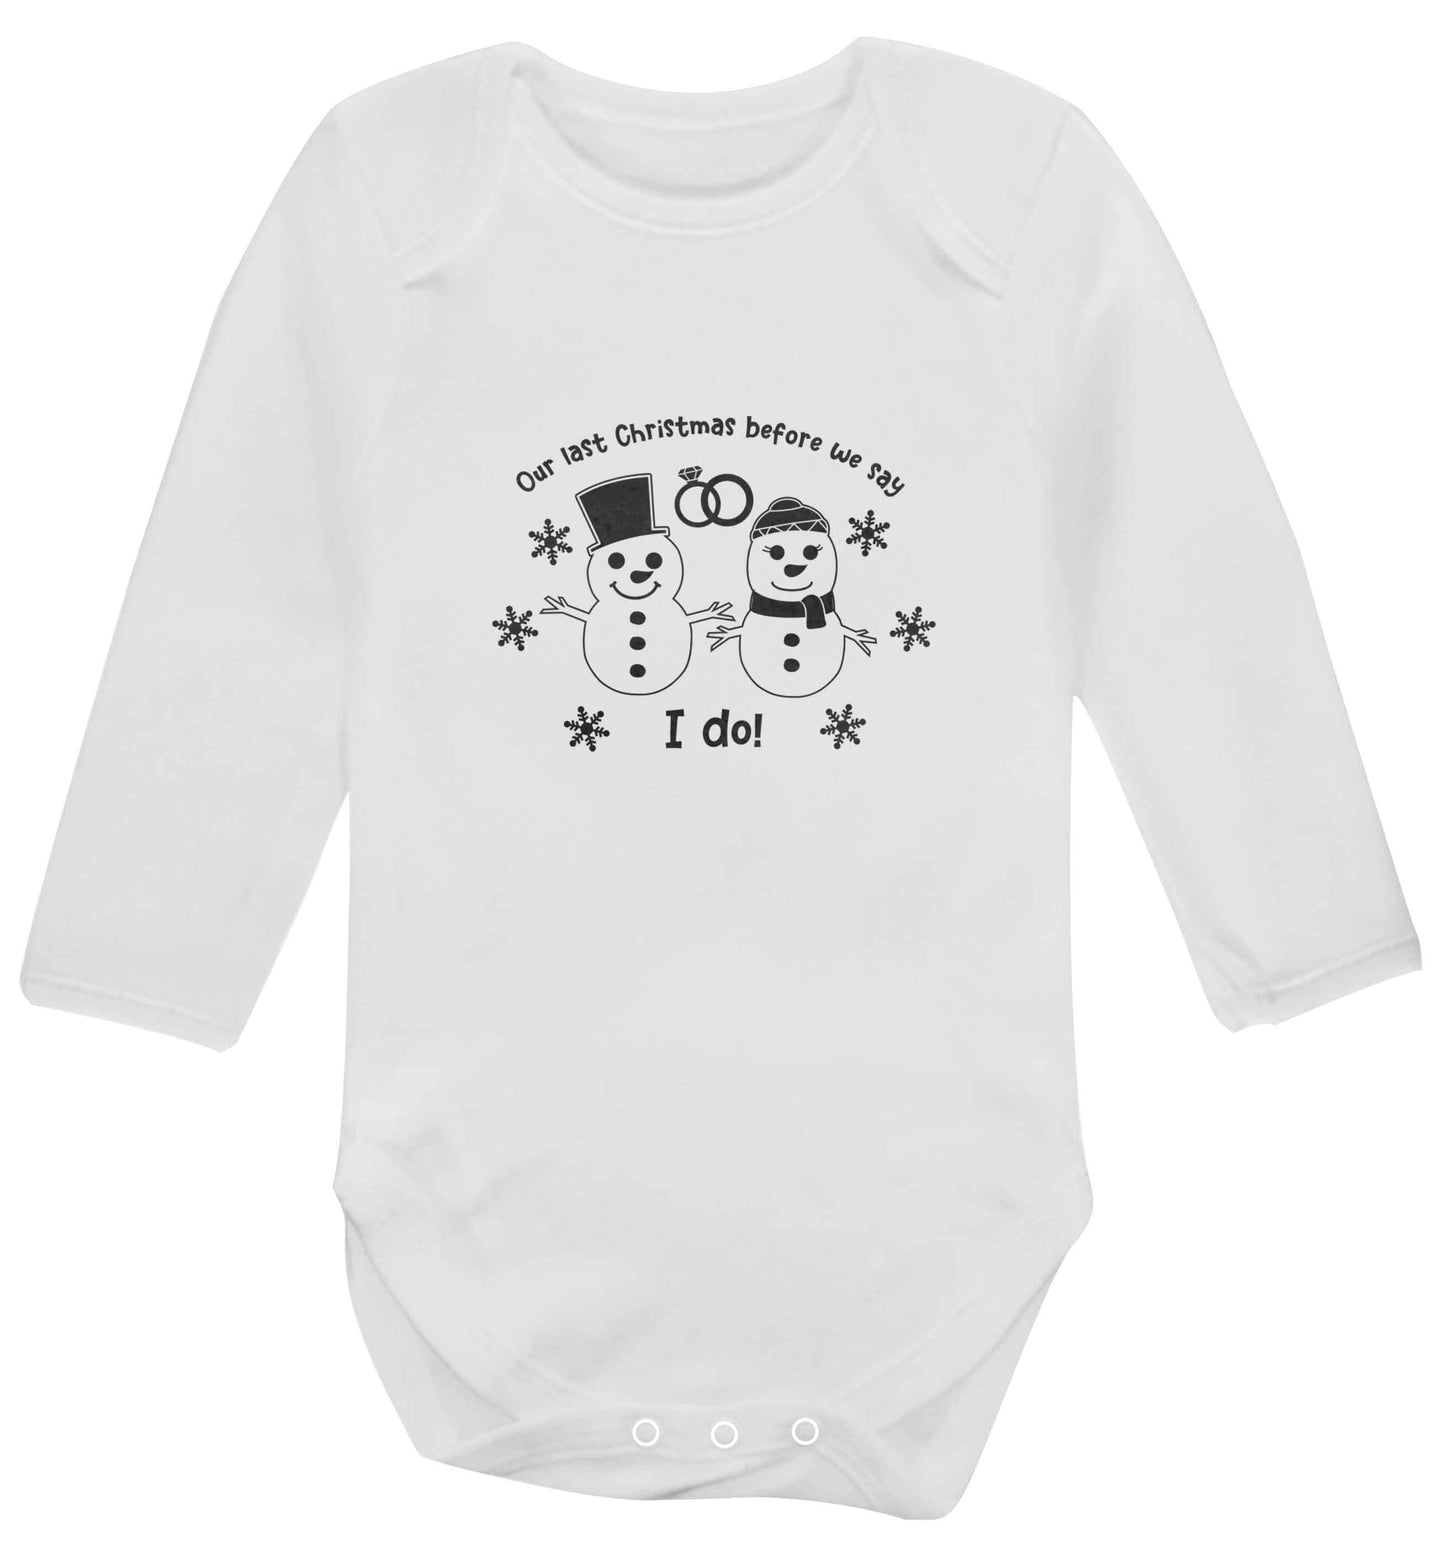 Last Christmas before we say I do baby vest long sleeved white 6-12 months